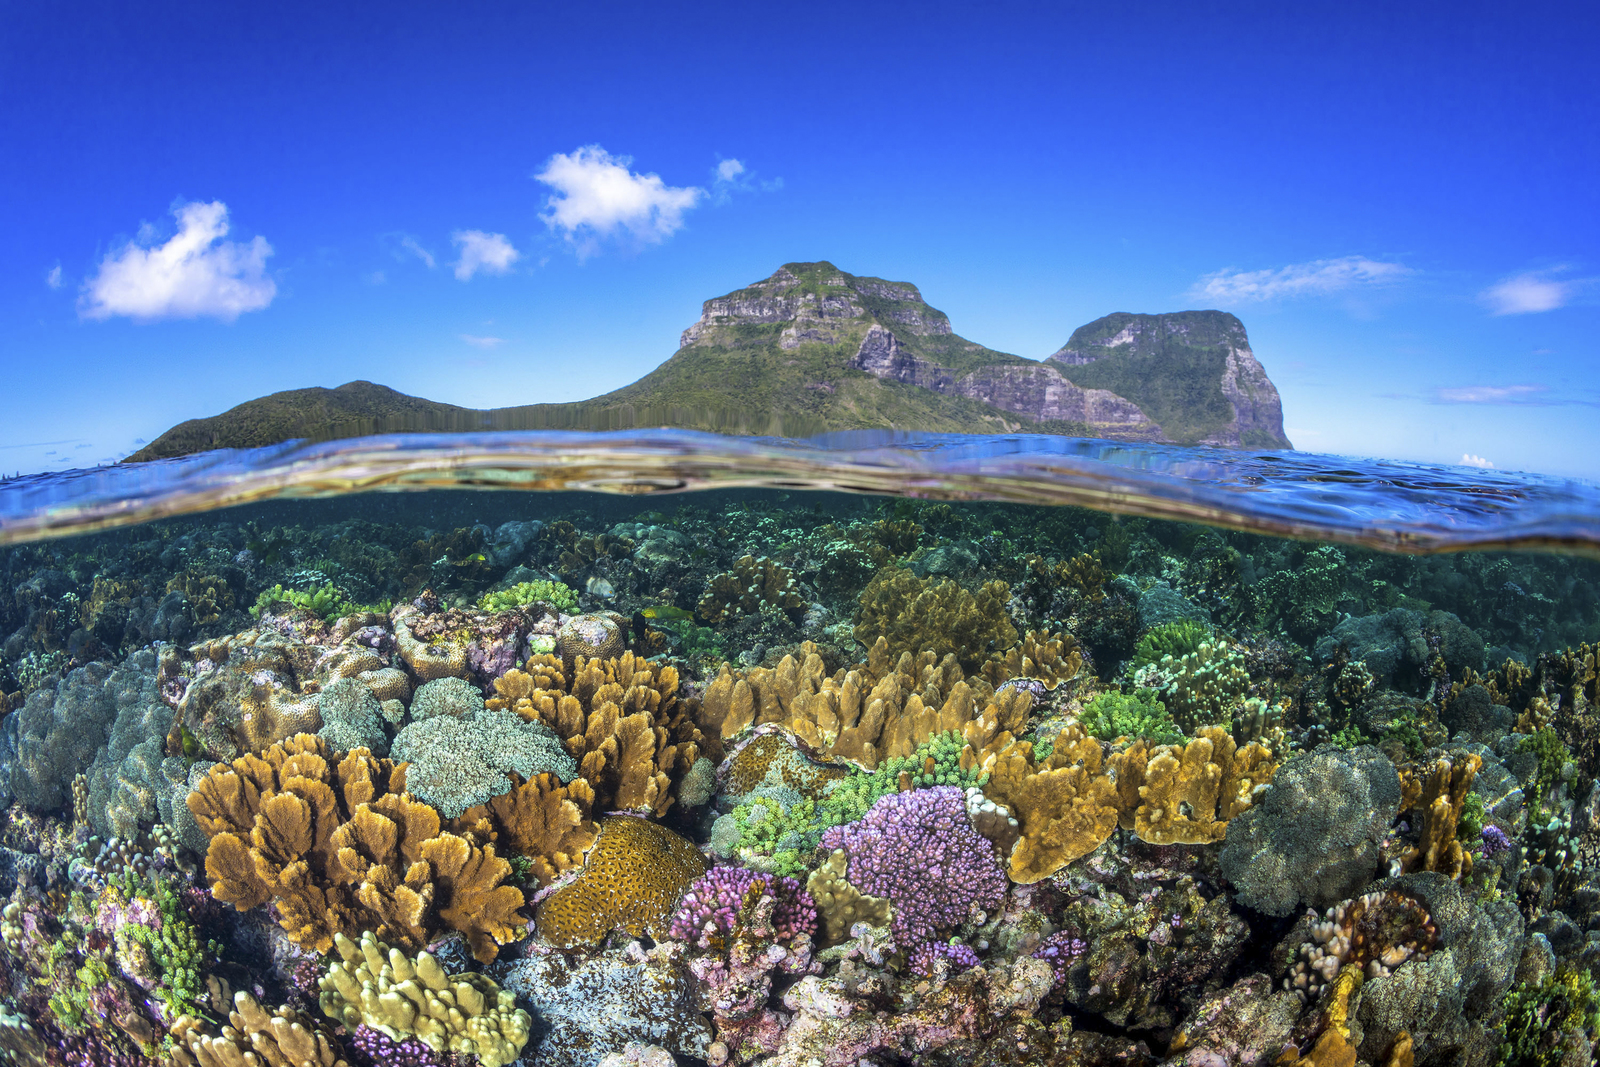 A split view of coral reefs under the water and mountains of Lord Howe Island visible in the distance.